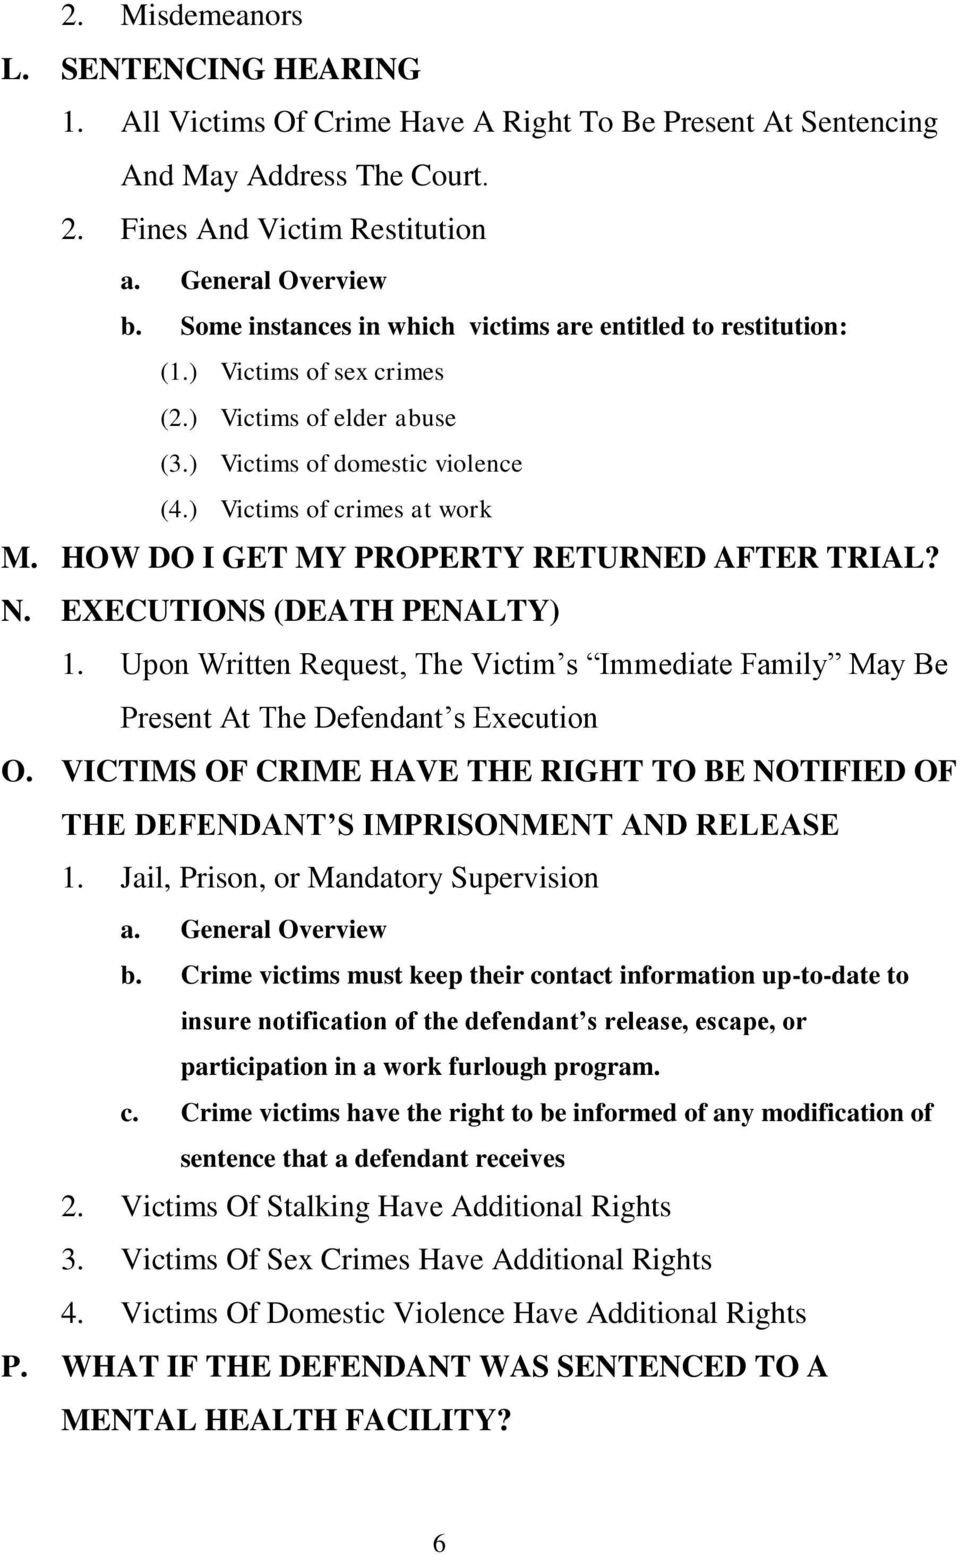 HOW DO I GET MY PROPERTY RETURNED AFTER TRIAL? N. EXECUTIONS (DEATH PENALTY) 1. Upon Written Request, The Victim s Immediate Family May Be Present At The Defendant s Execution O.